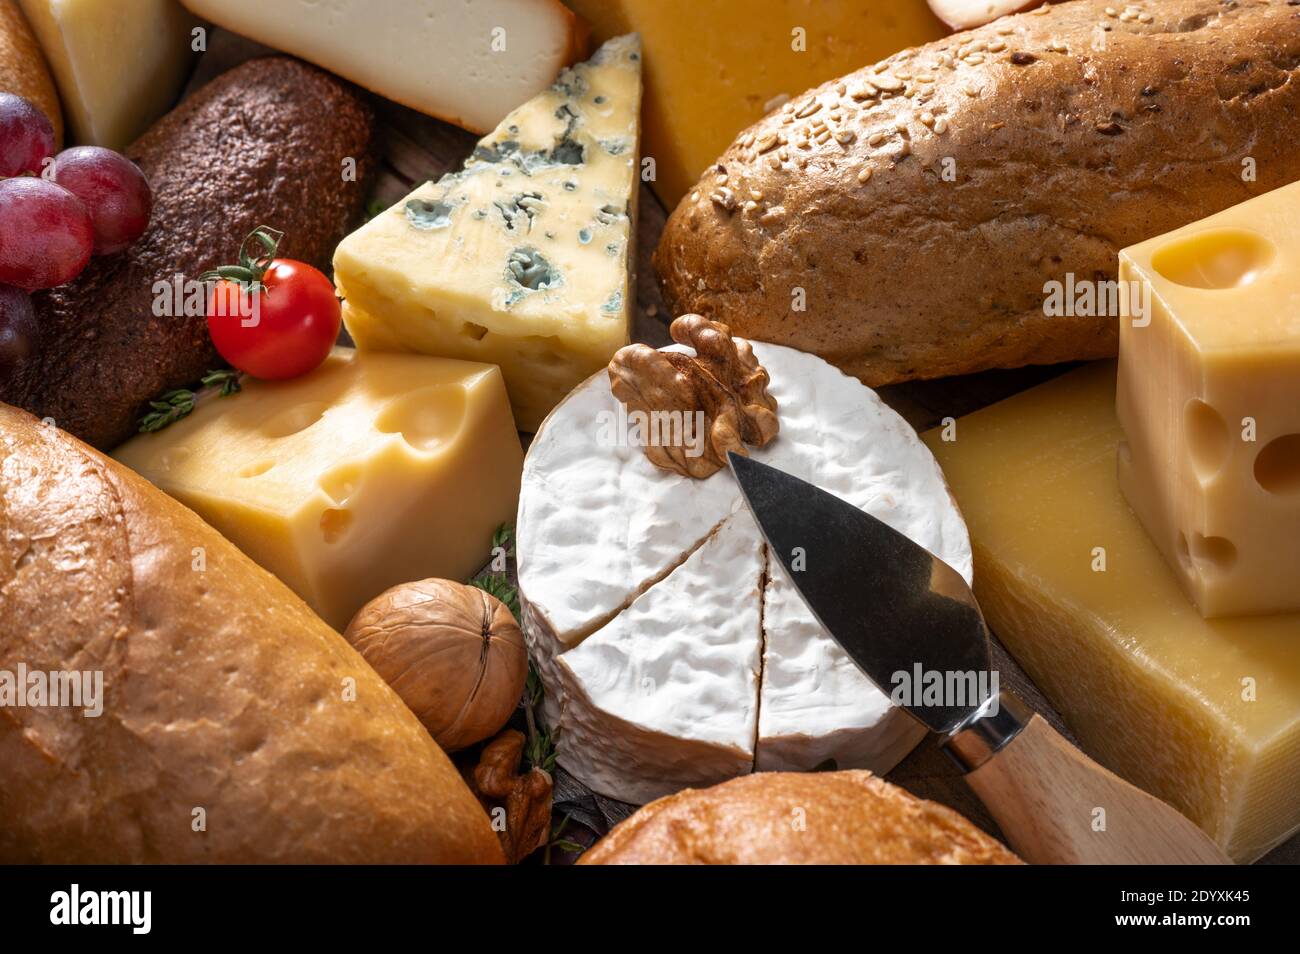 cheese and bread background. many types of bread and cheese. cheese platter, tasting assortment of various types of cheese, grape, walnut, tomato. fro Stock Photo